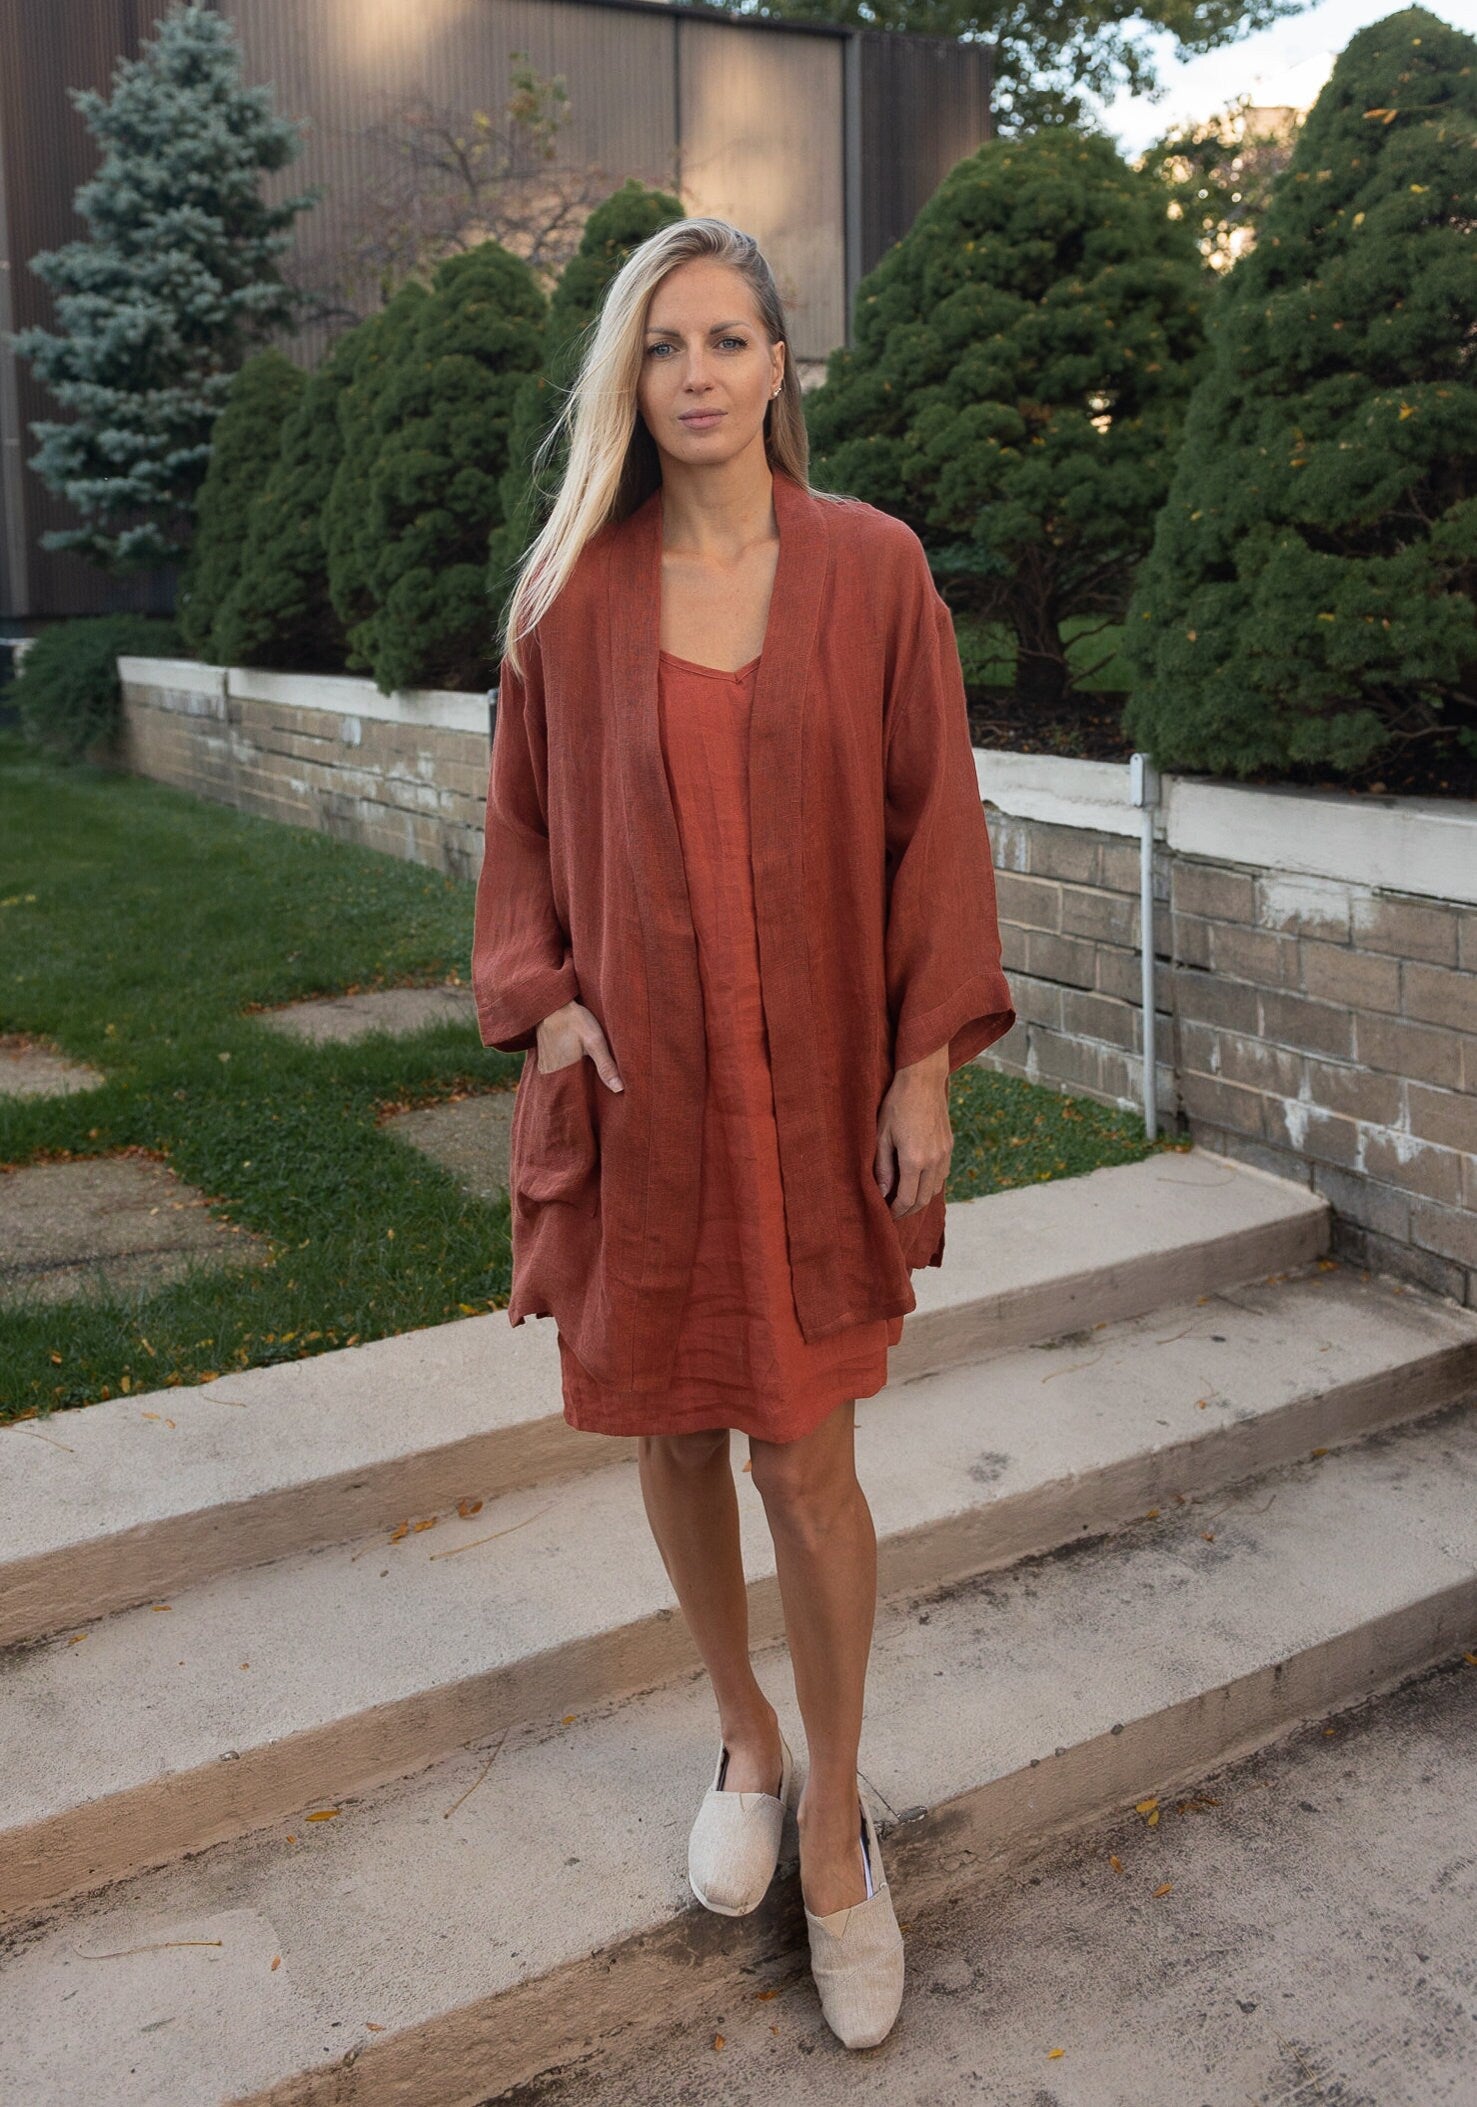 Stylish woman embracing cottagecore vibes in an oversized linen cardigan